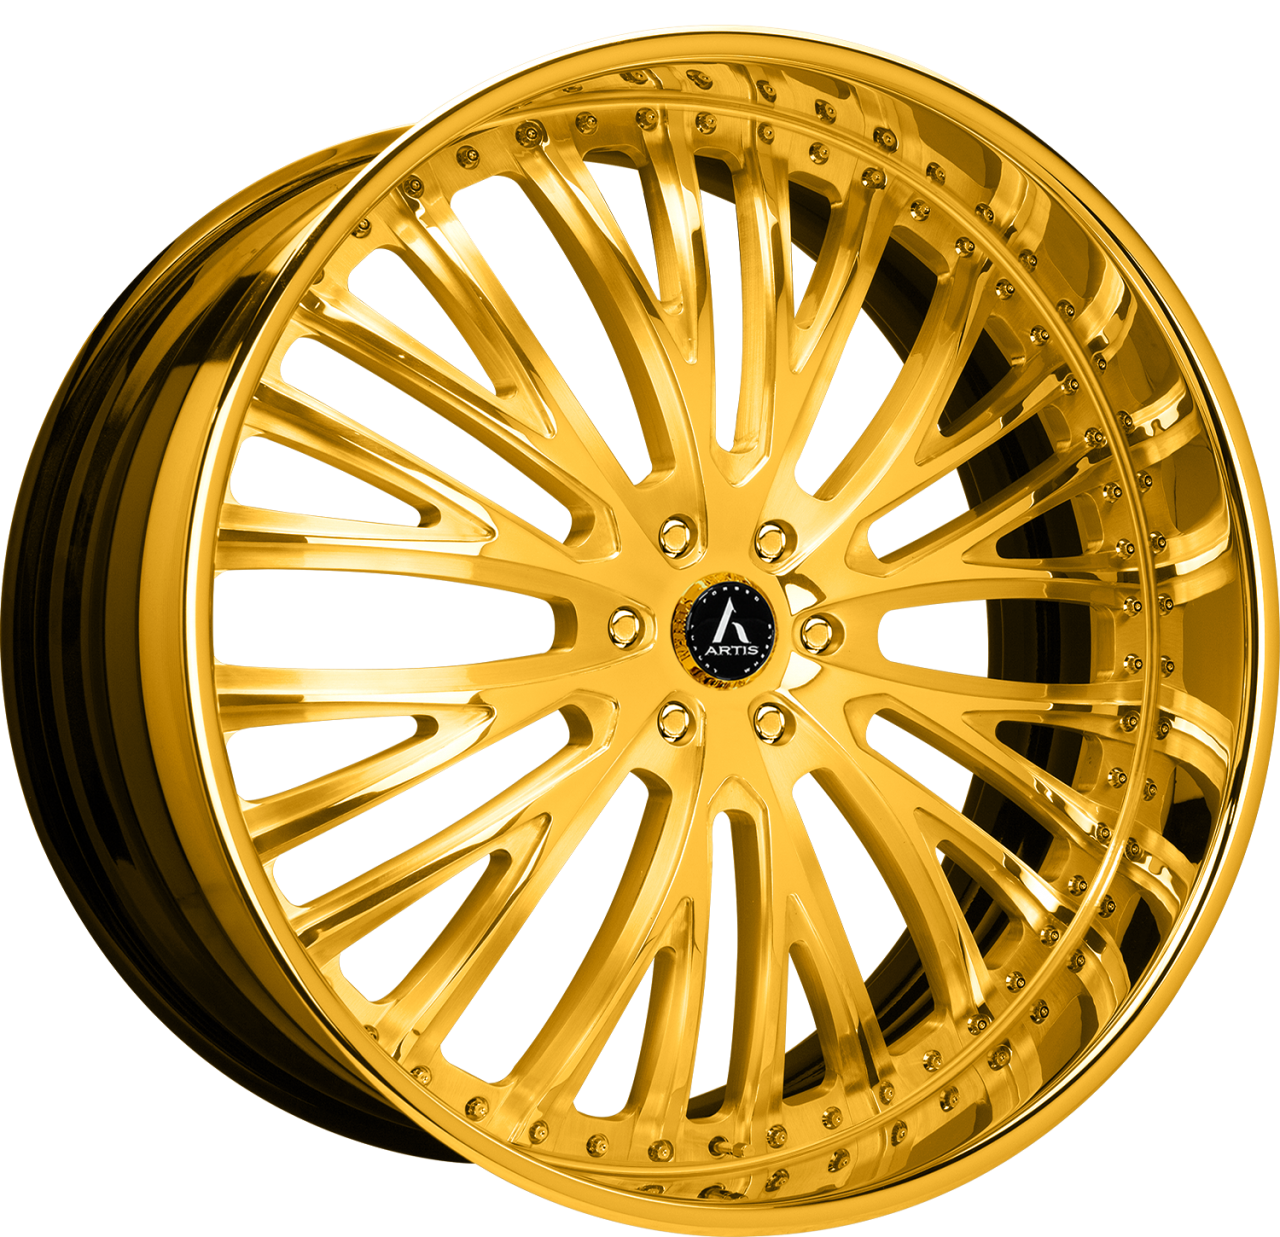 Artis Forged Woodward-M wheel with Gold finish